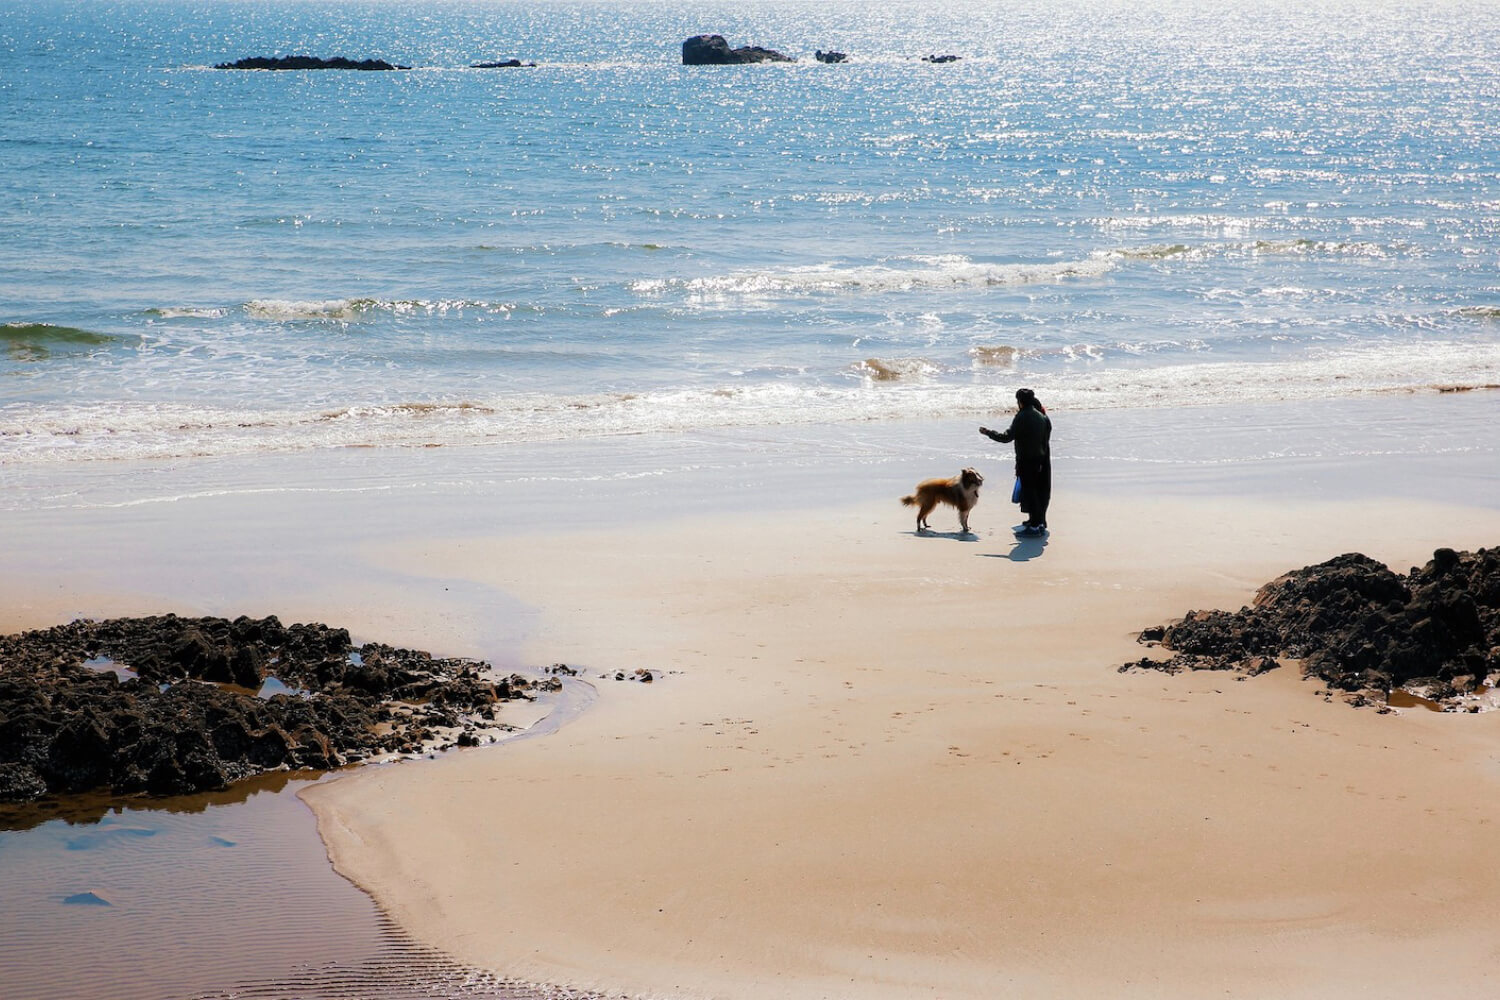 Just you and your dog having a positive experience on the beach together